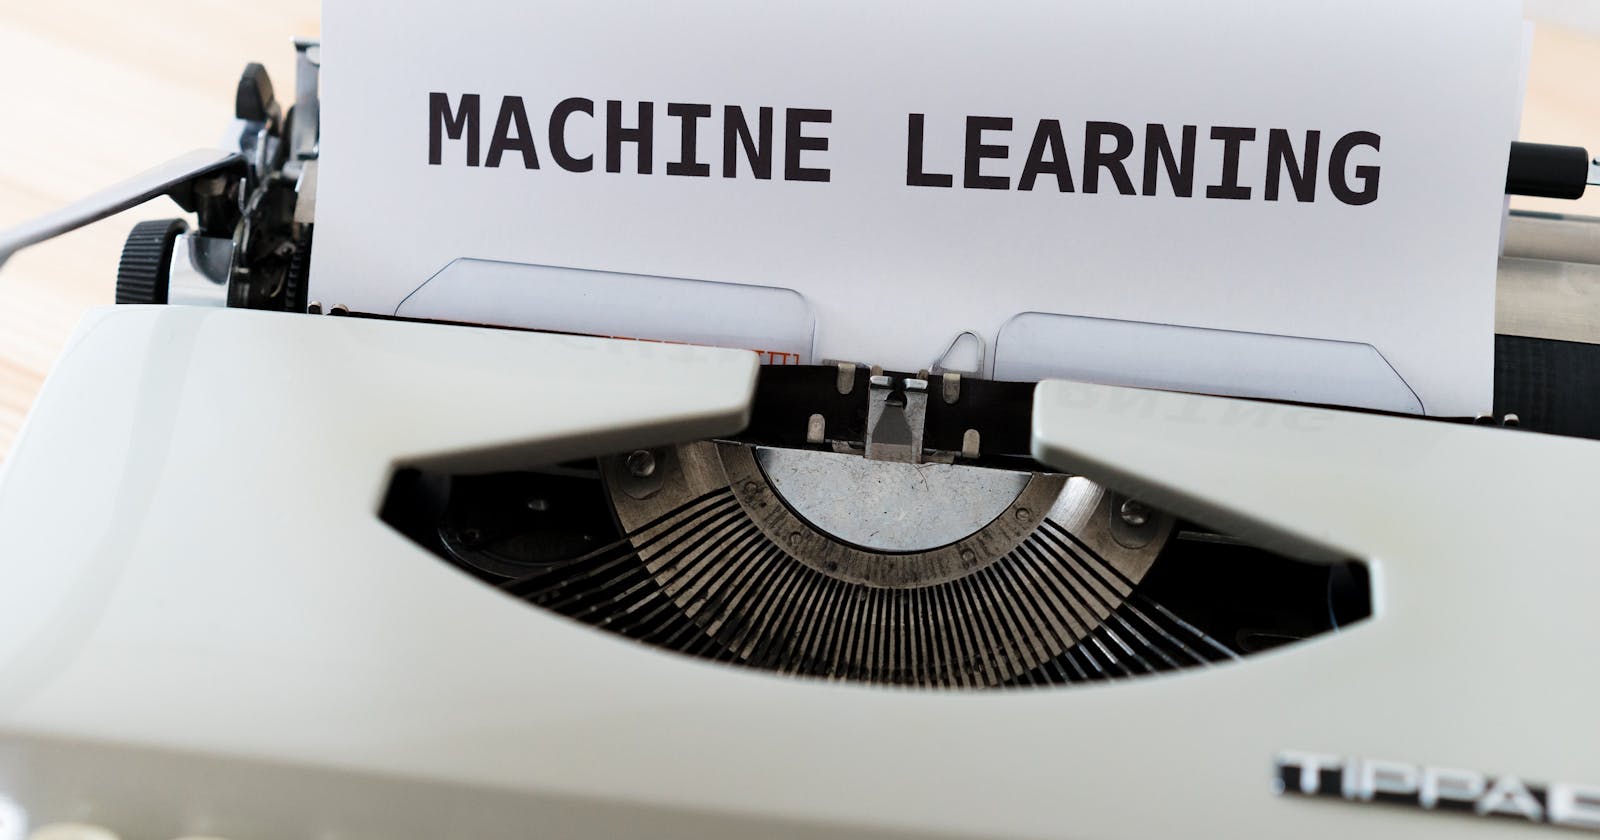 "An Introduction to Machine Learning: Understanding the Basics and Applications"